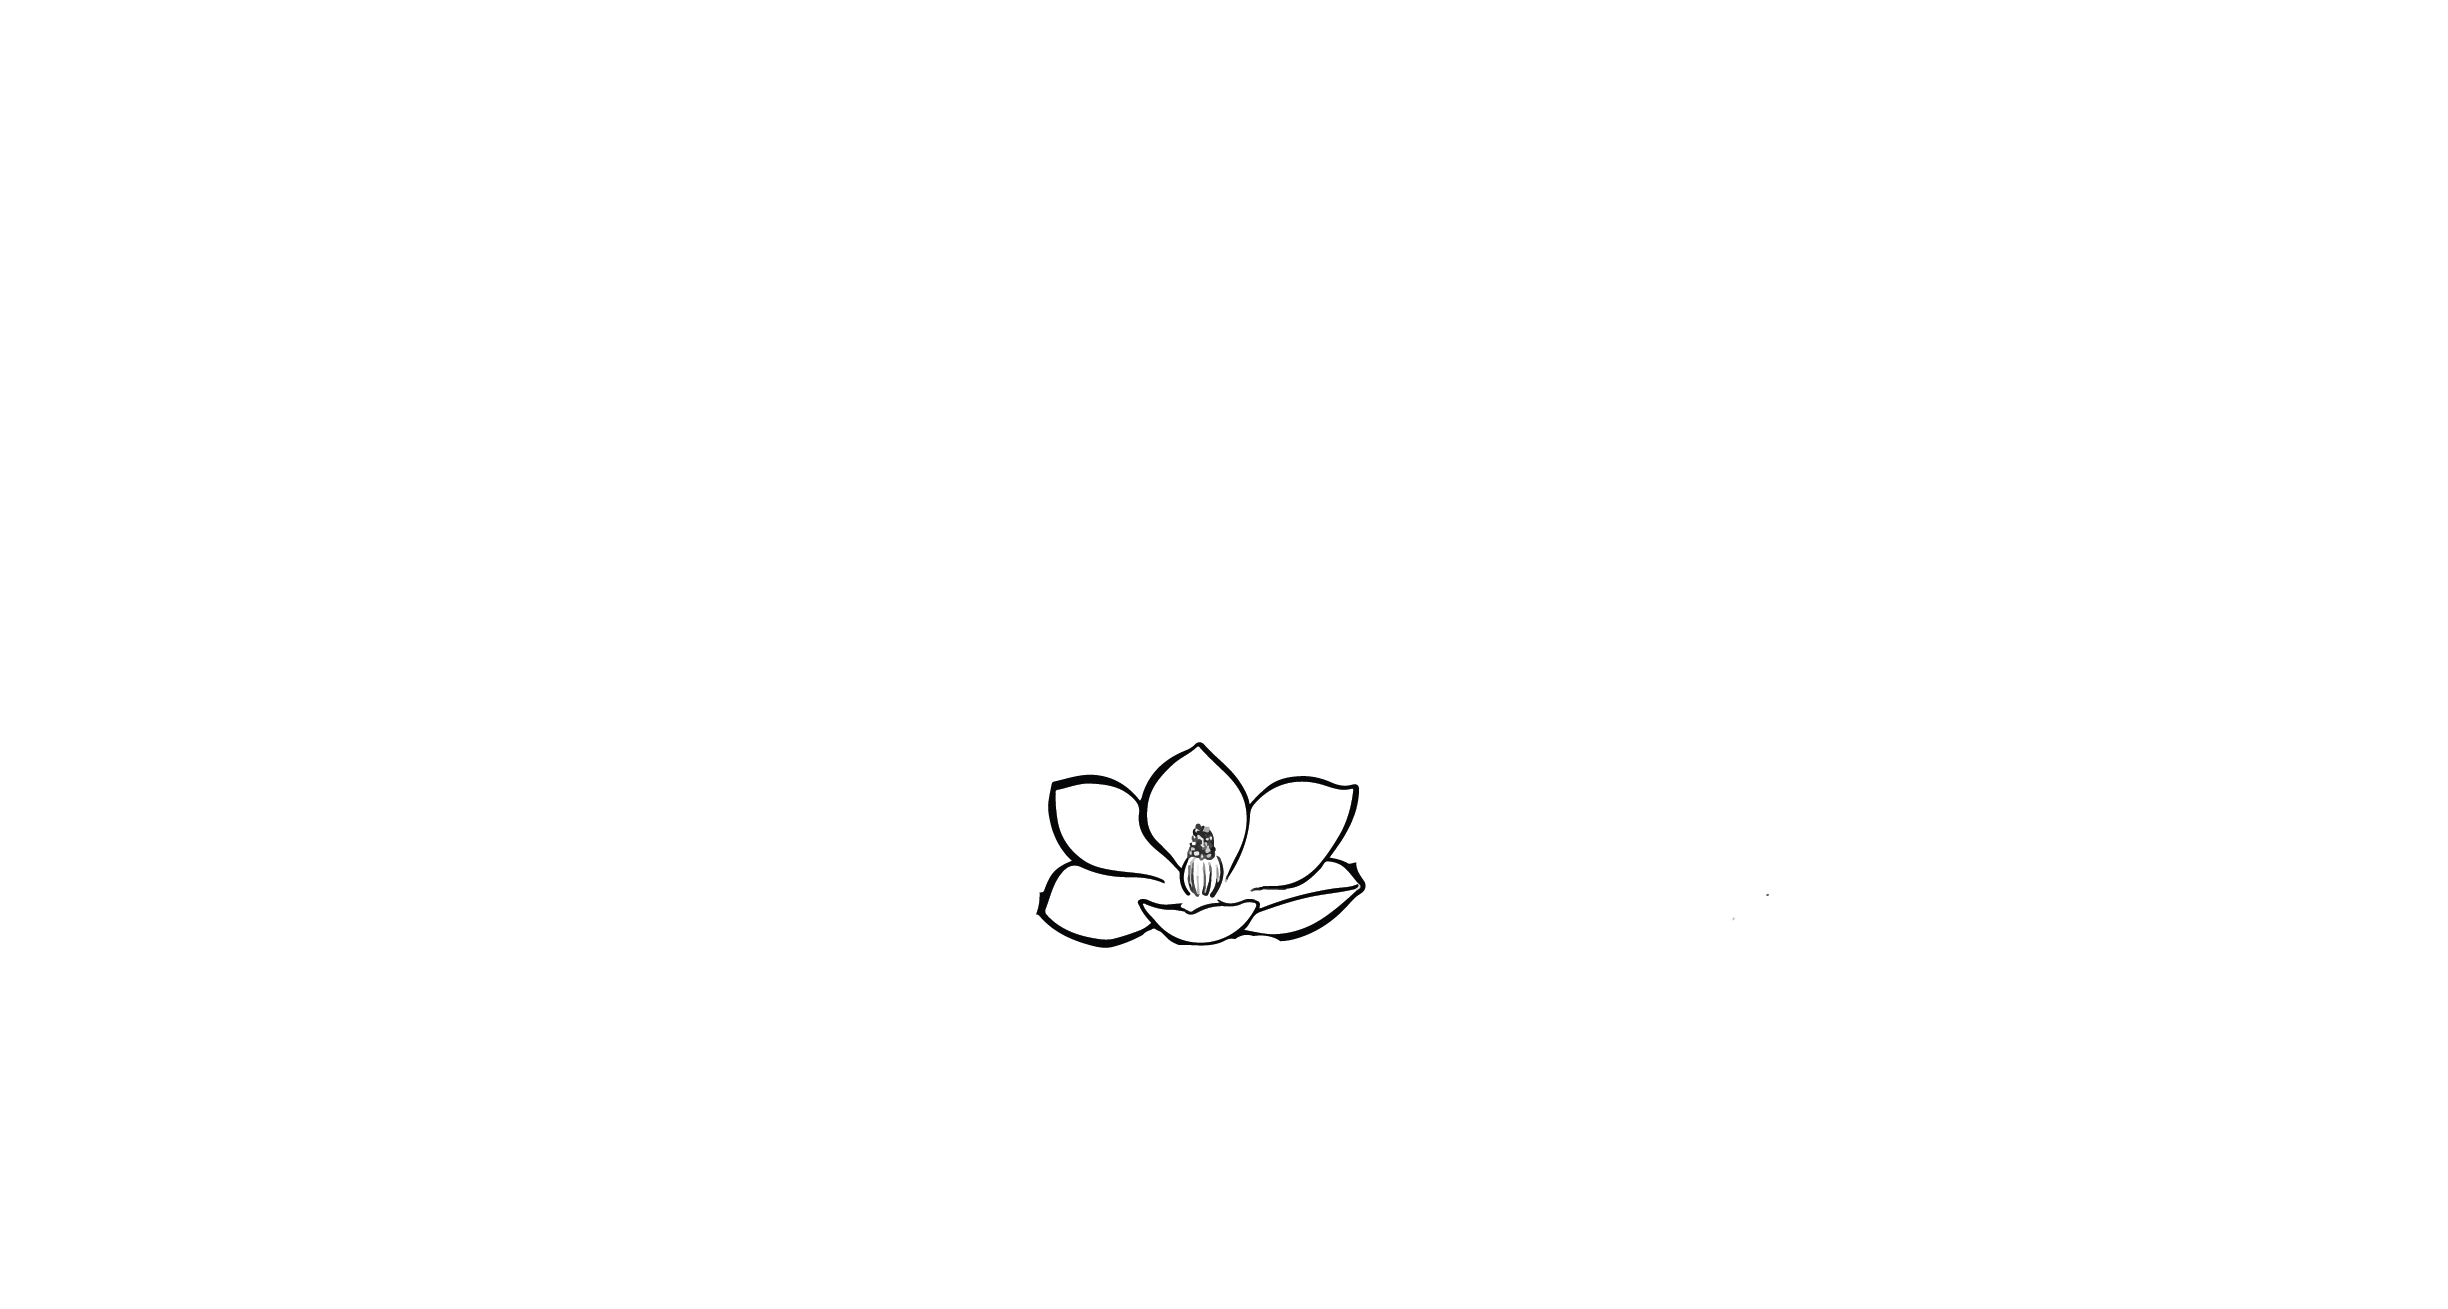 DR. HAK JA HAN MOON | THE MOTHER OF PEACE